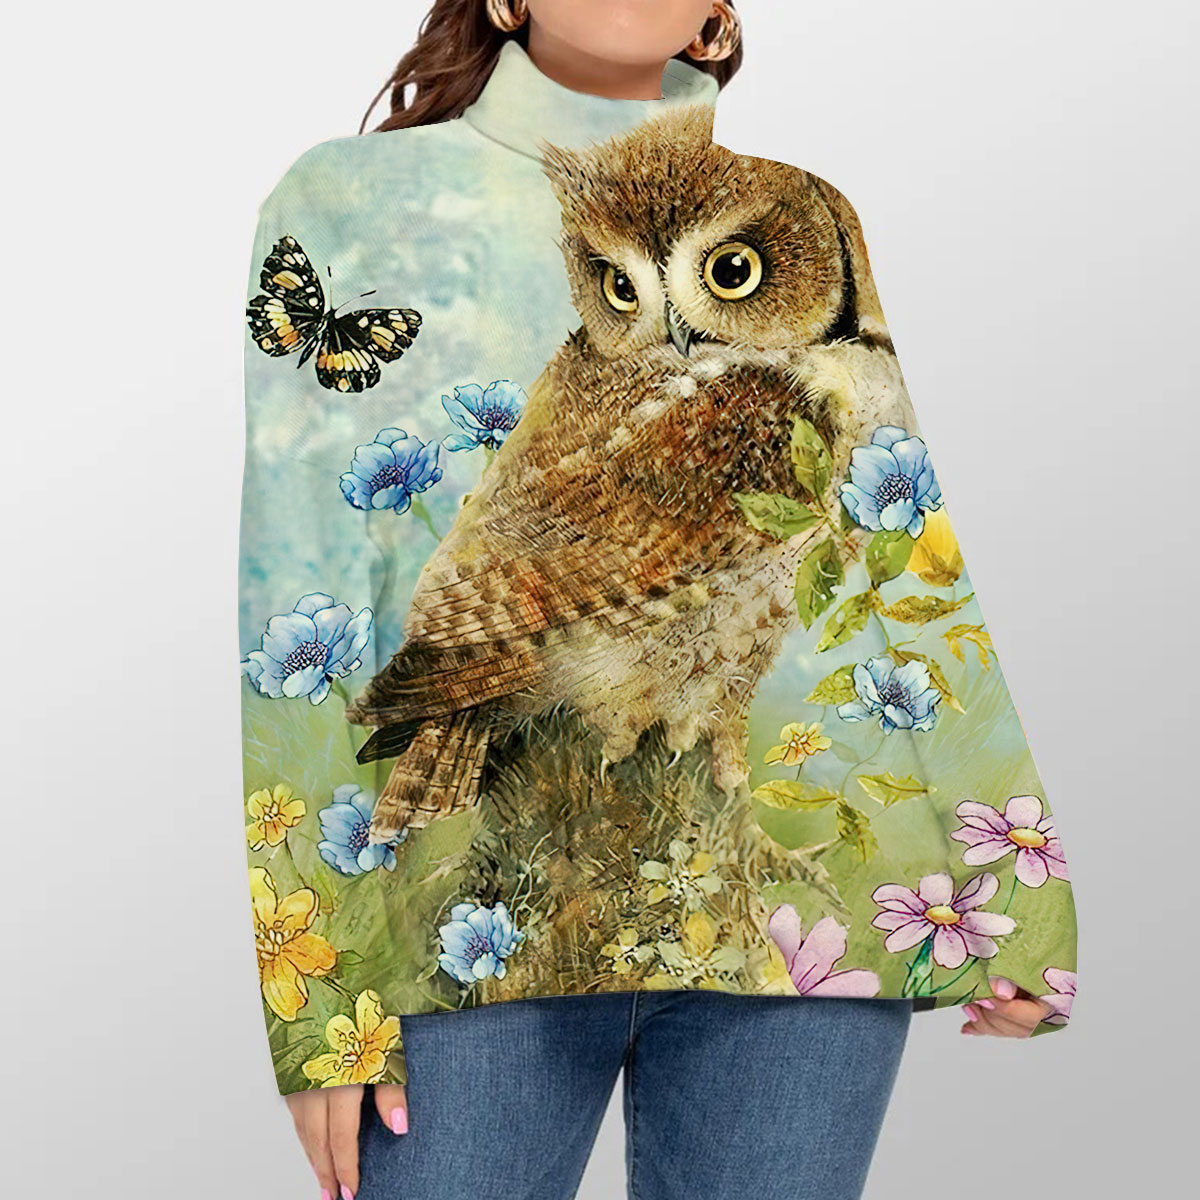 Owl And Butterfly Turtleneck Sweater